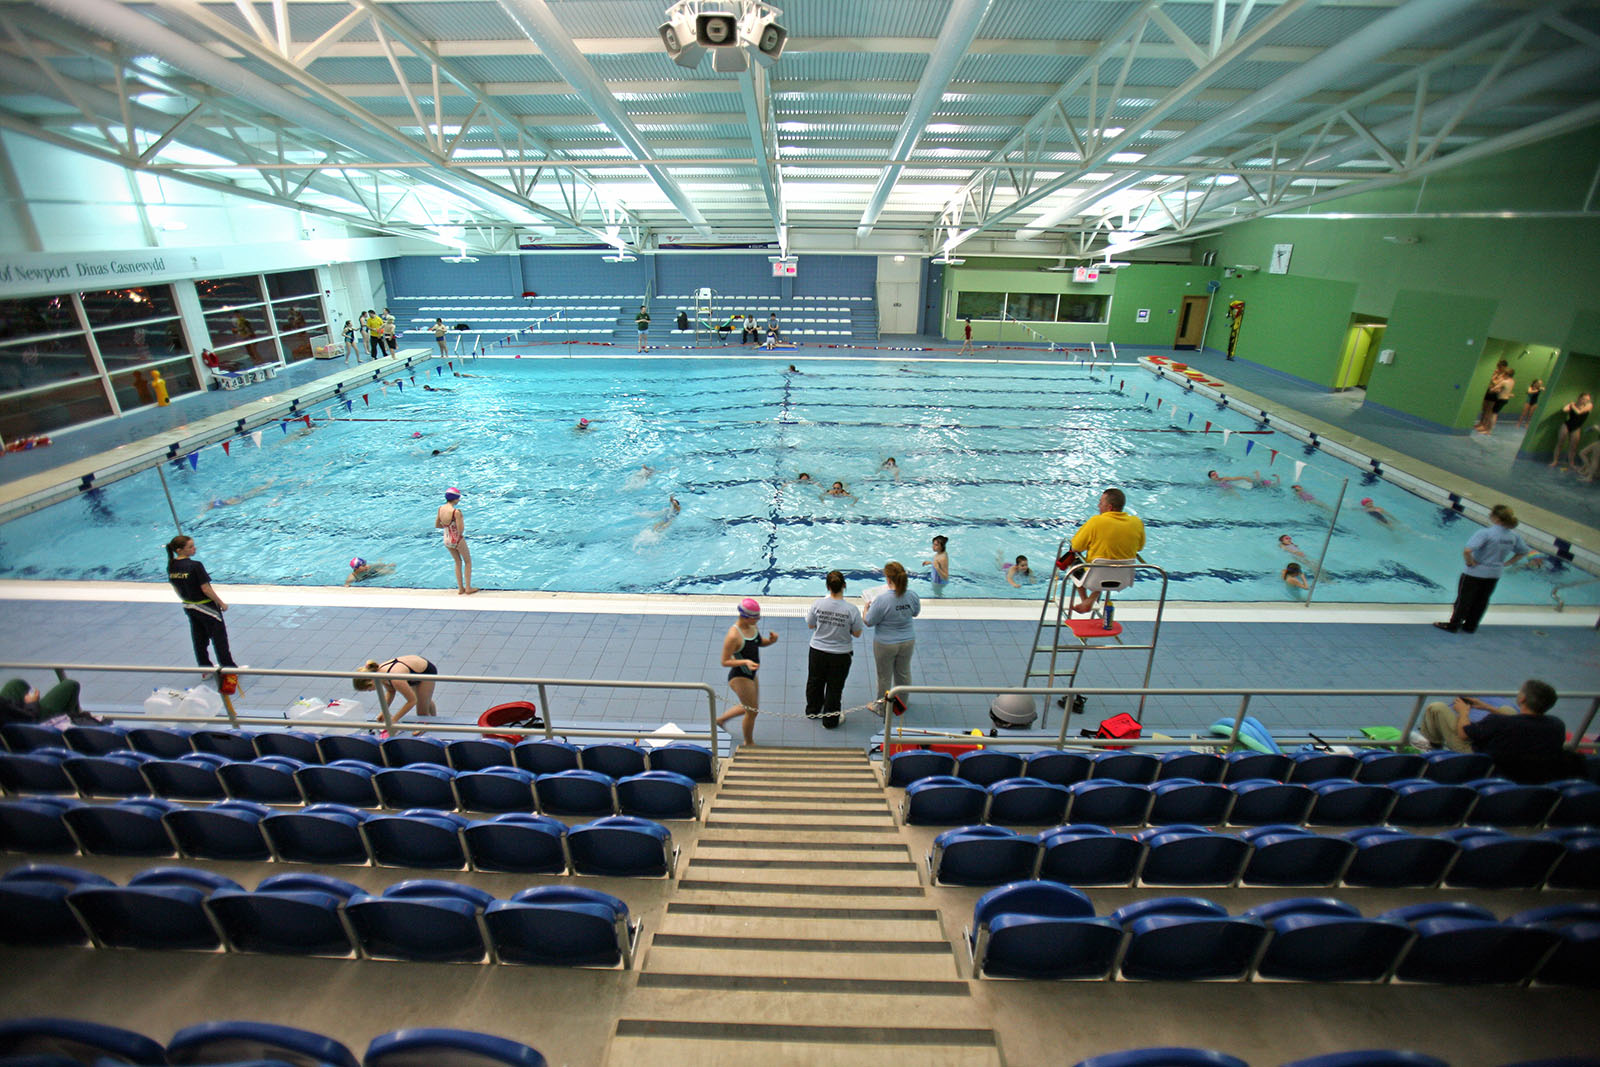 Regional Pool and Tennis Centre